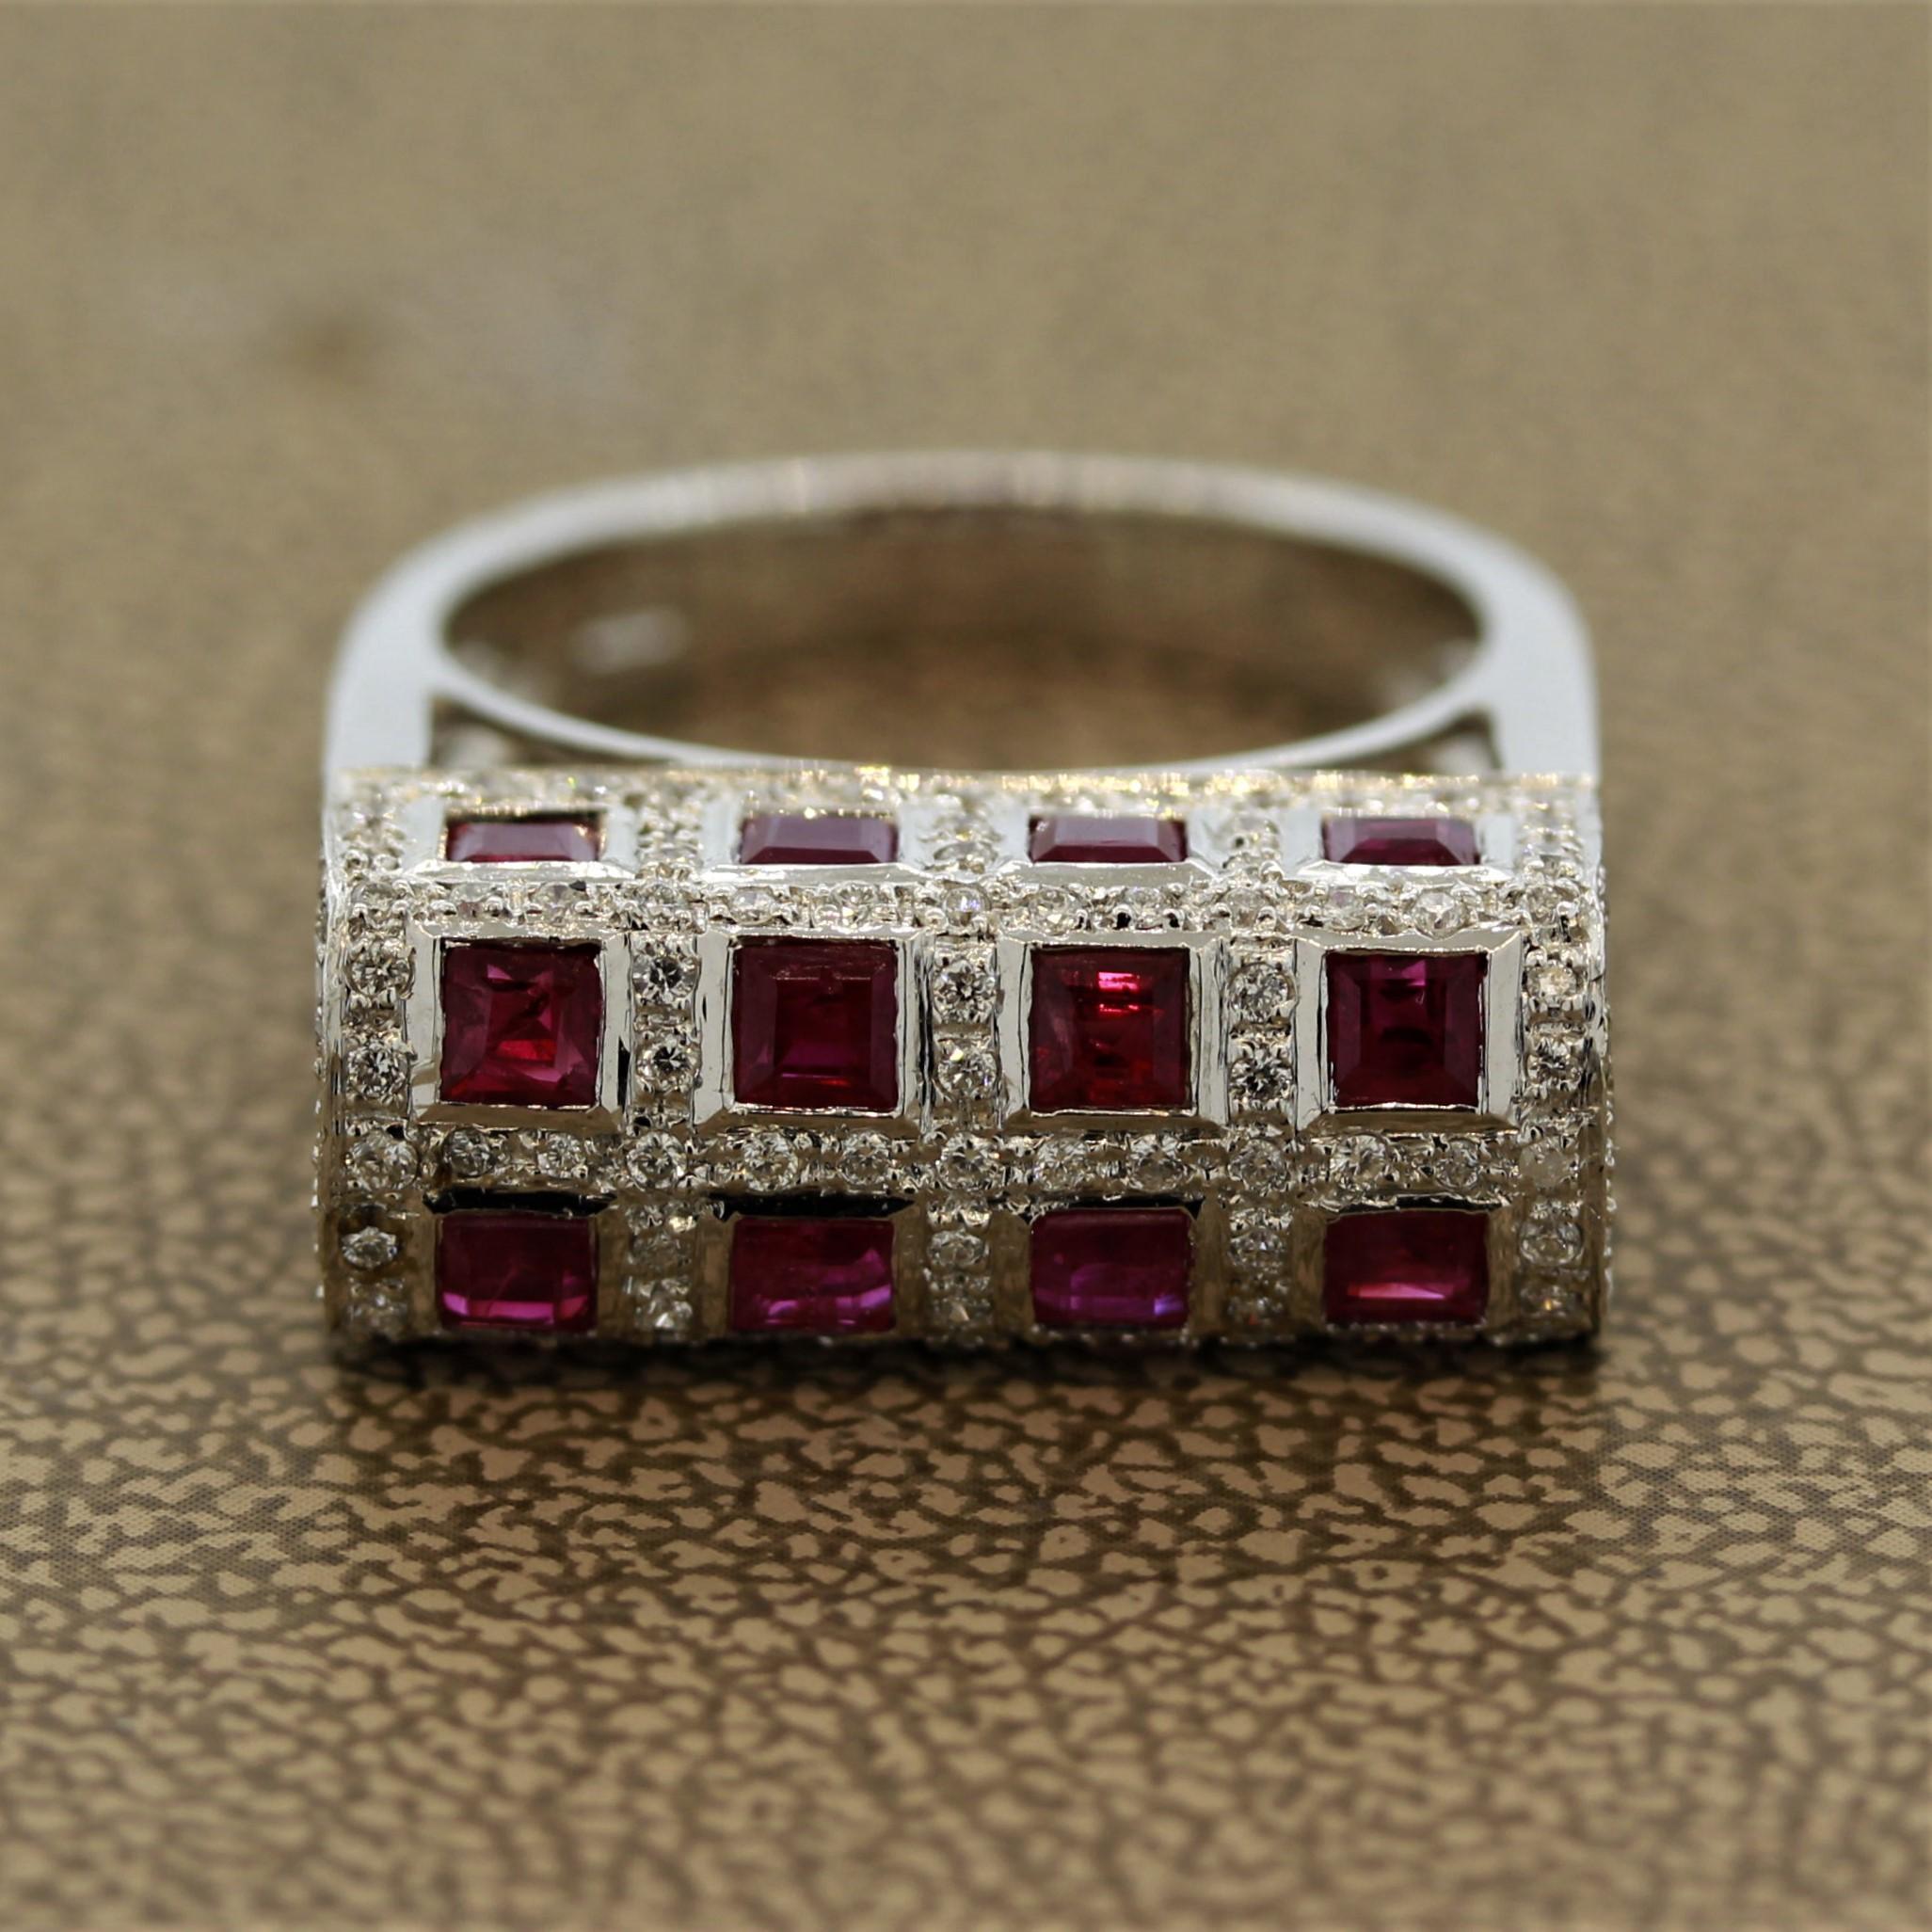 A unique ruby ring featuring 14 square cut vivid red rubies weighing a total of 2.70 carats. They are accented by 0.47 carats of round brilliant cut diamonds set in 14k white gold. A fun and stylish ring that can be worn casually or dressed